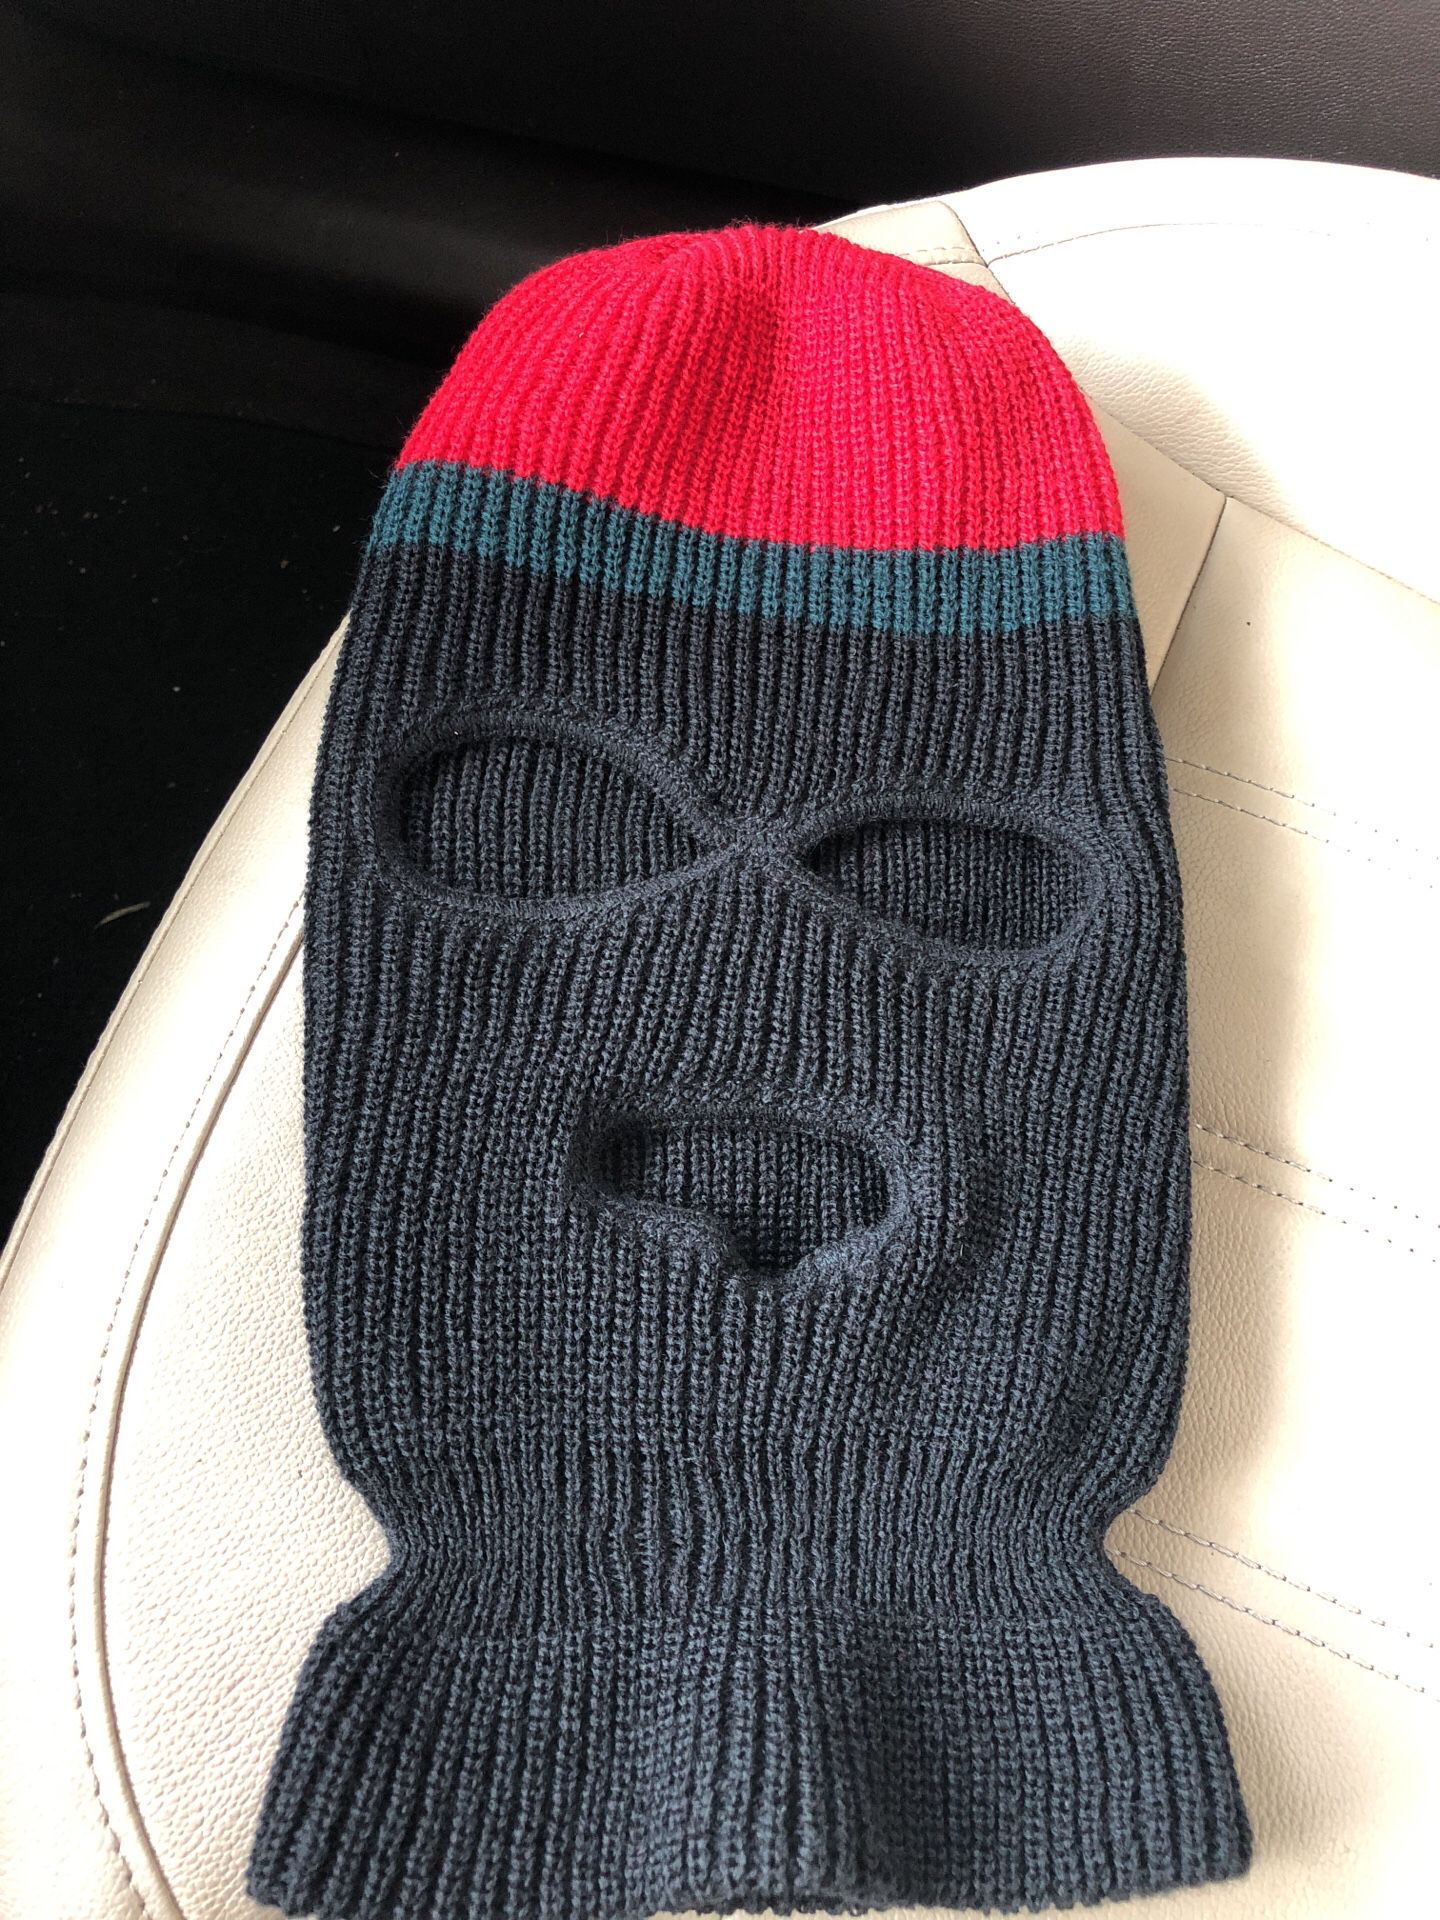 Gucci ski mask for Sale in West Chester, PA - OfferUp